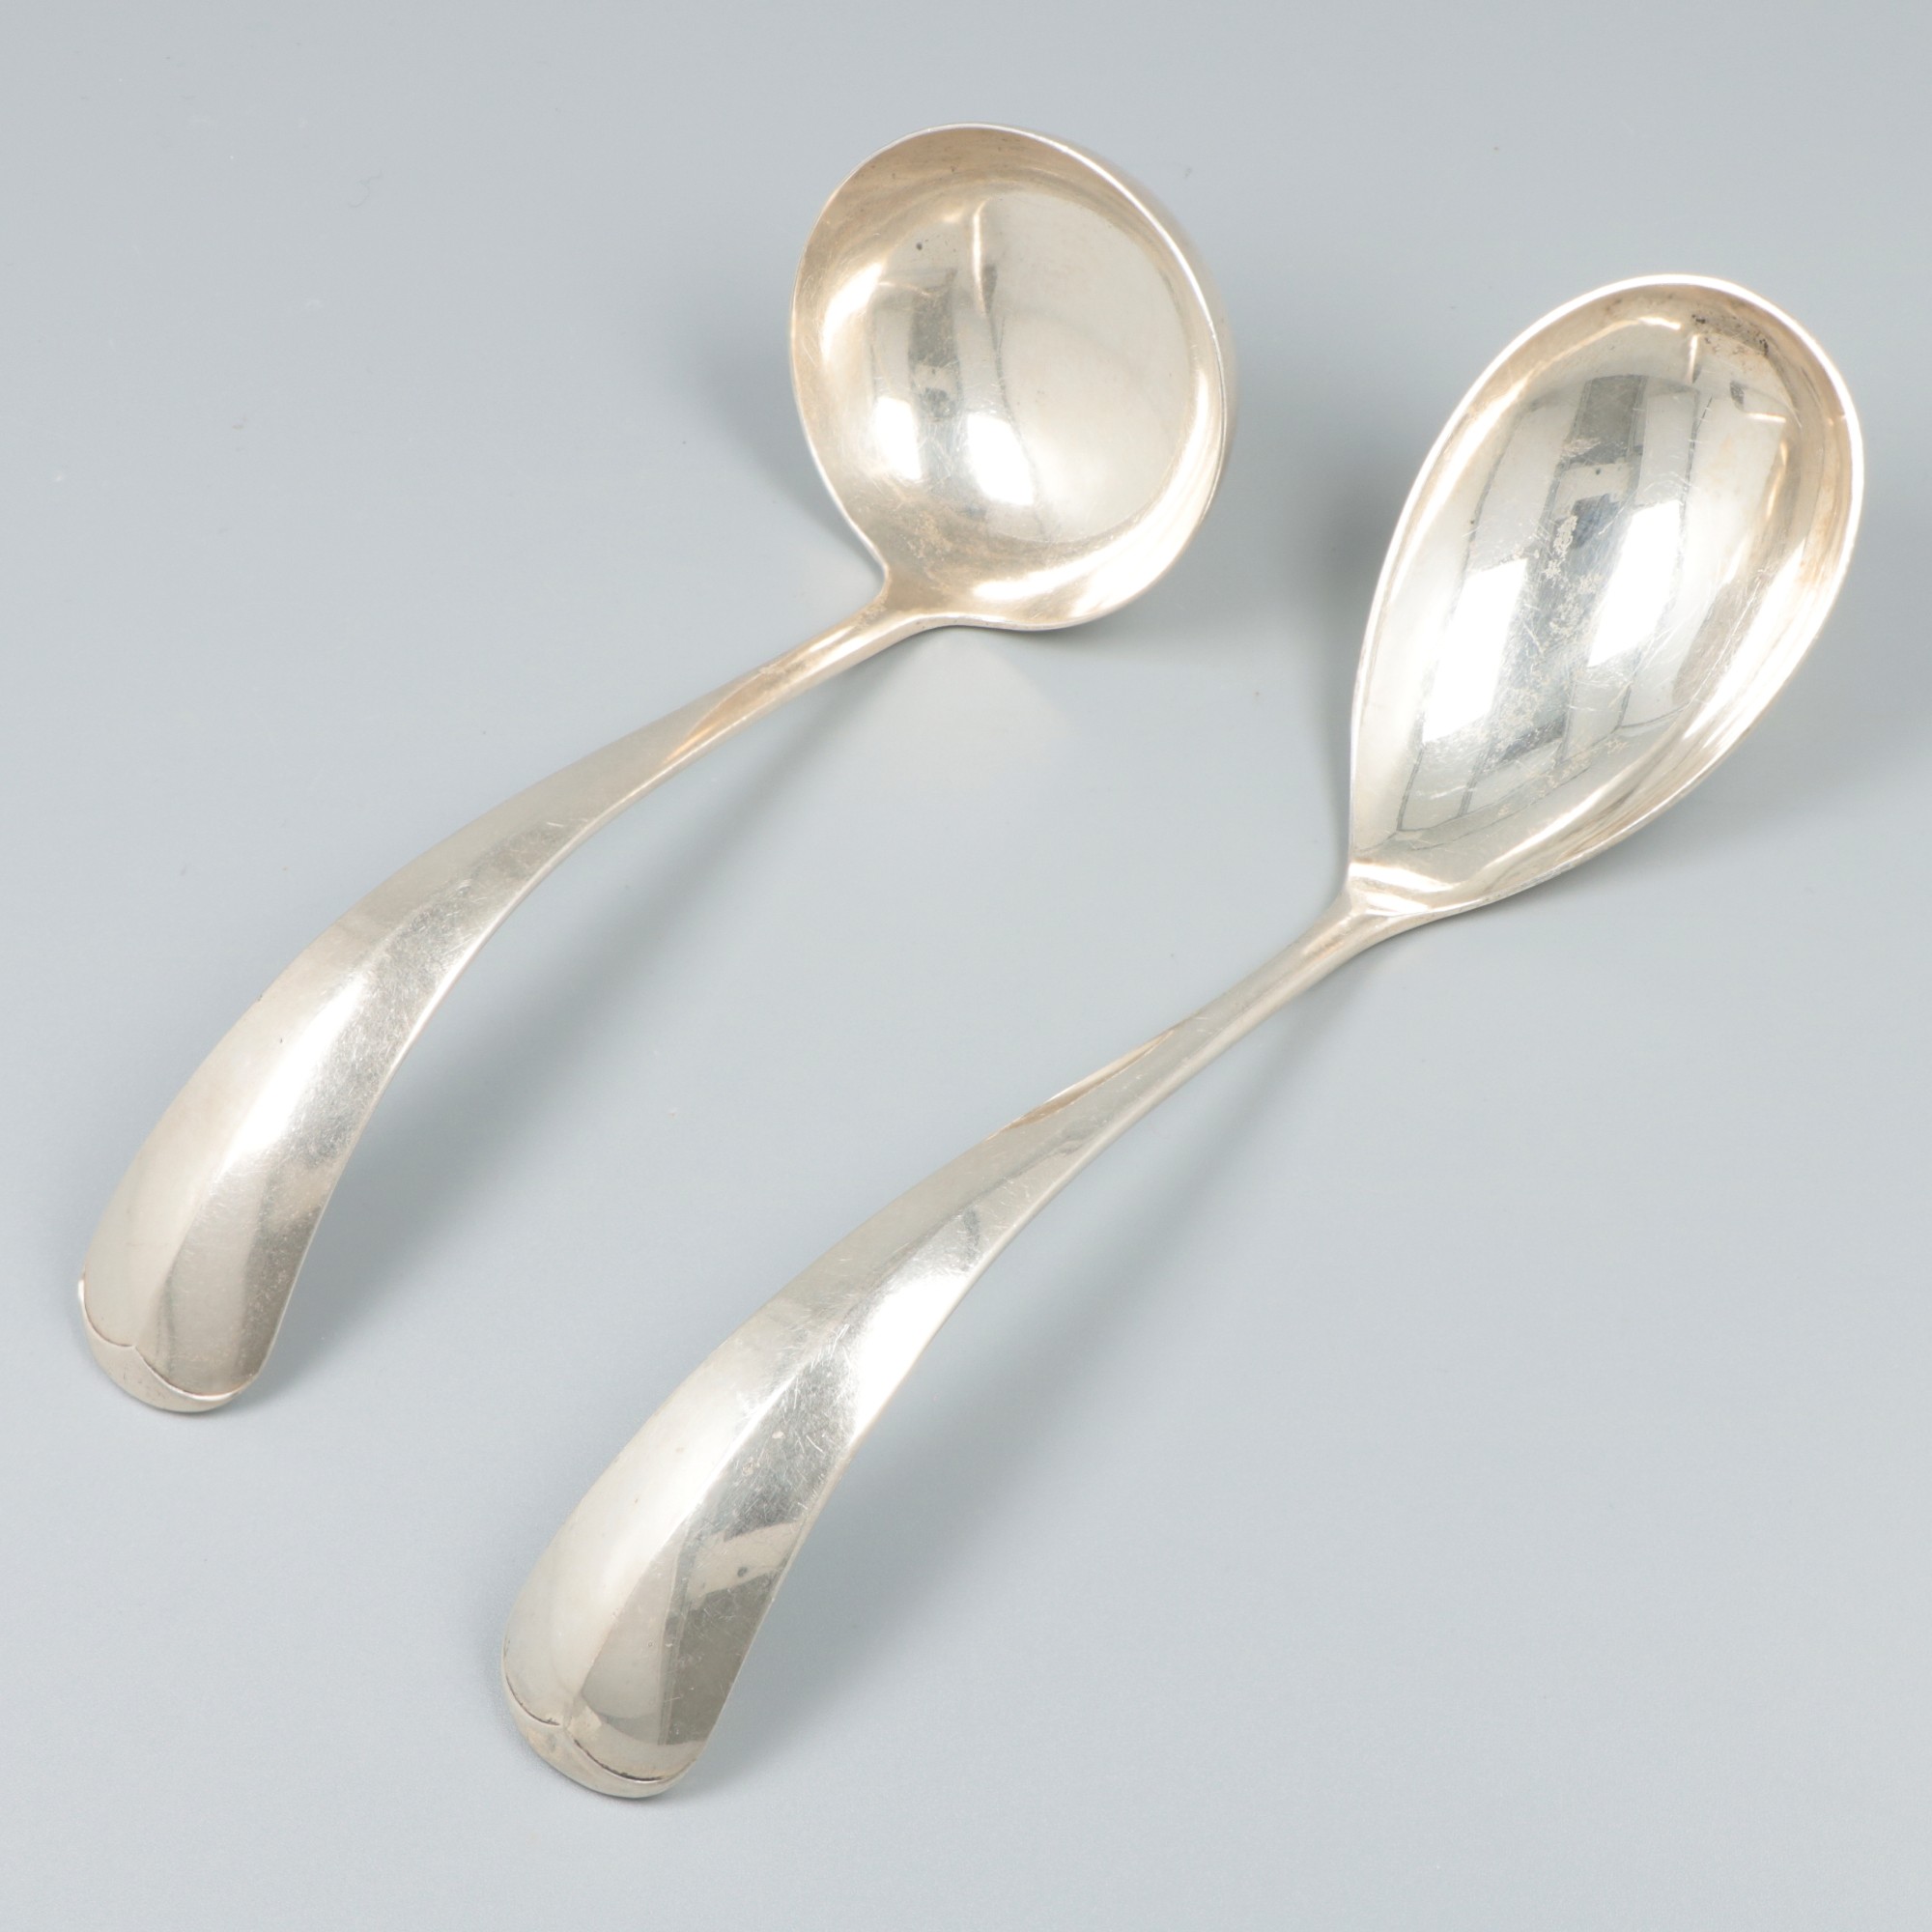 Sauce spoon & compote spoon "Haags Lofje", silver.